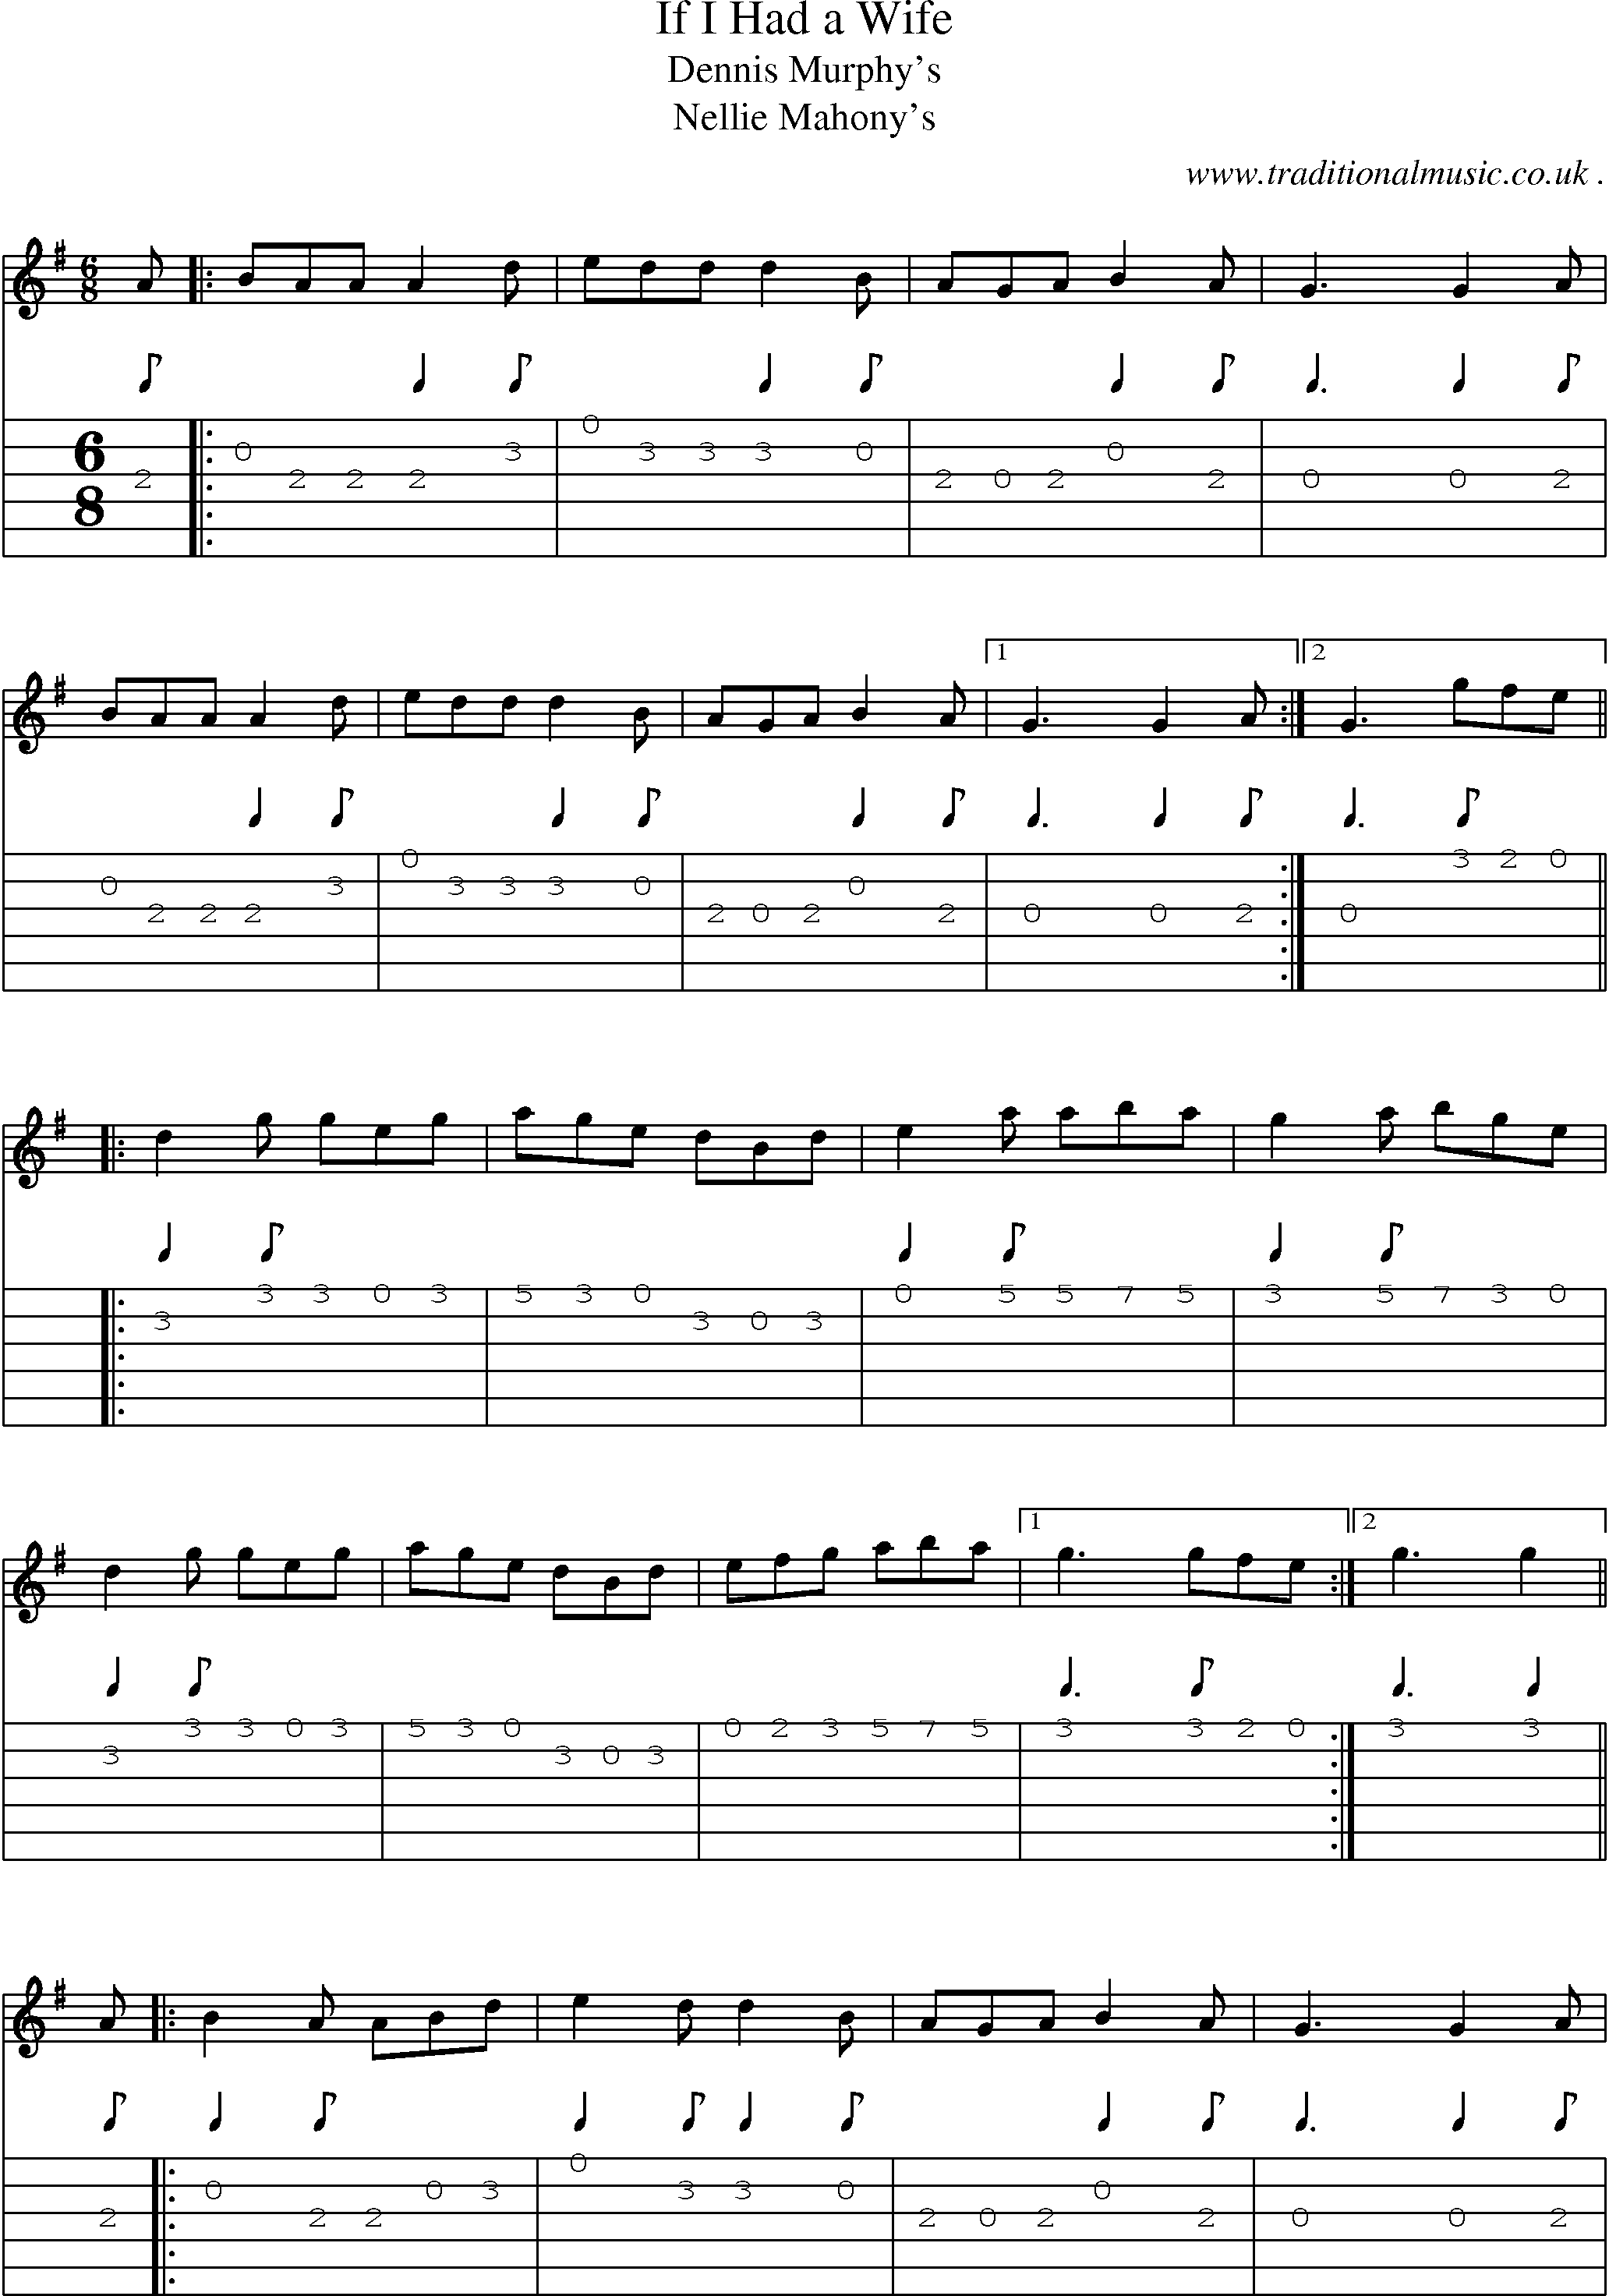 Sheet-Music and Guitar Tabs for If I Had A Wife